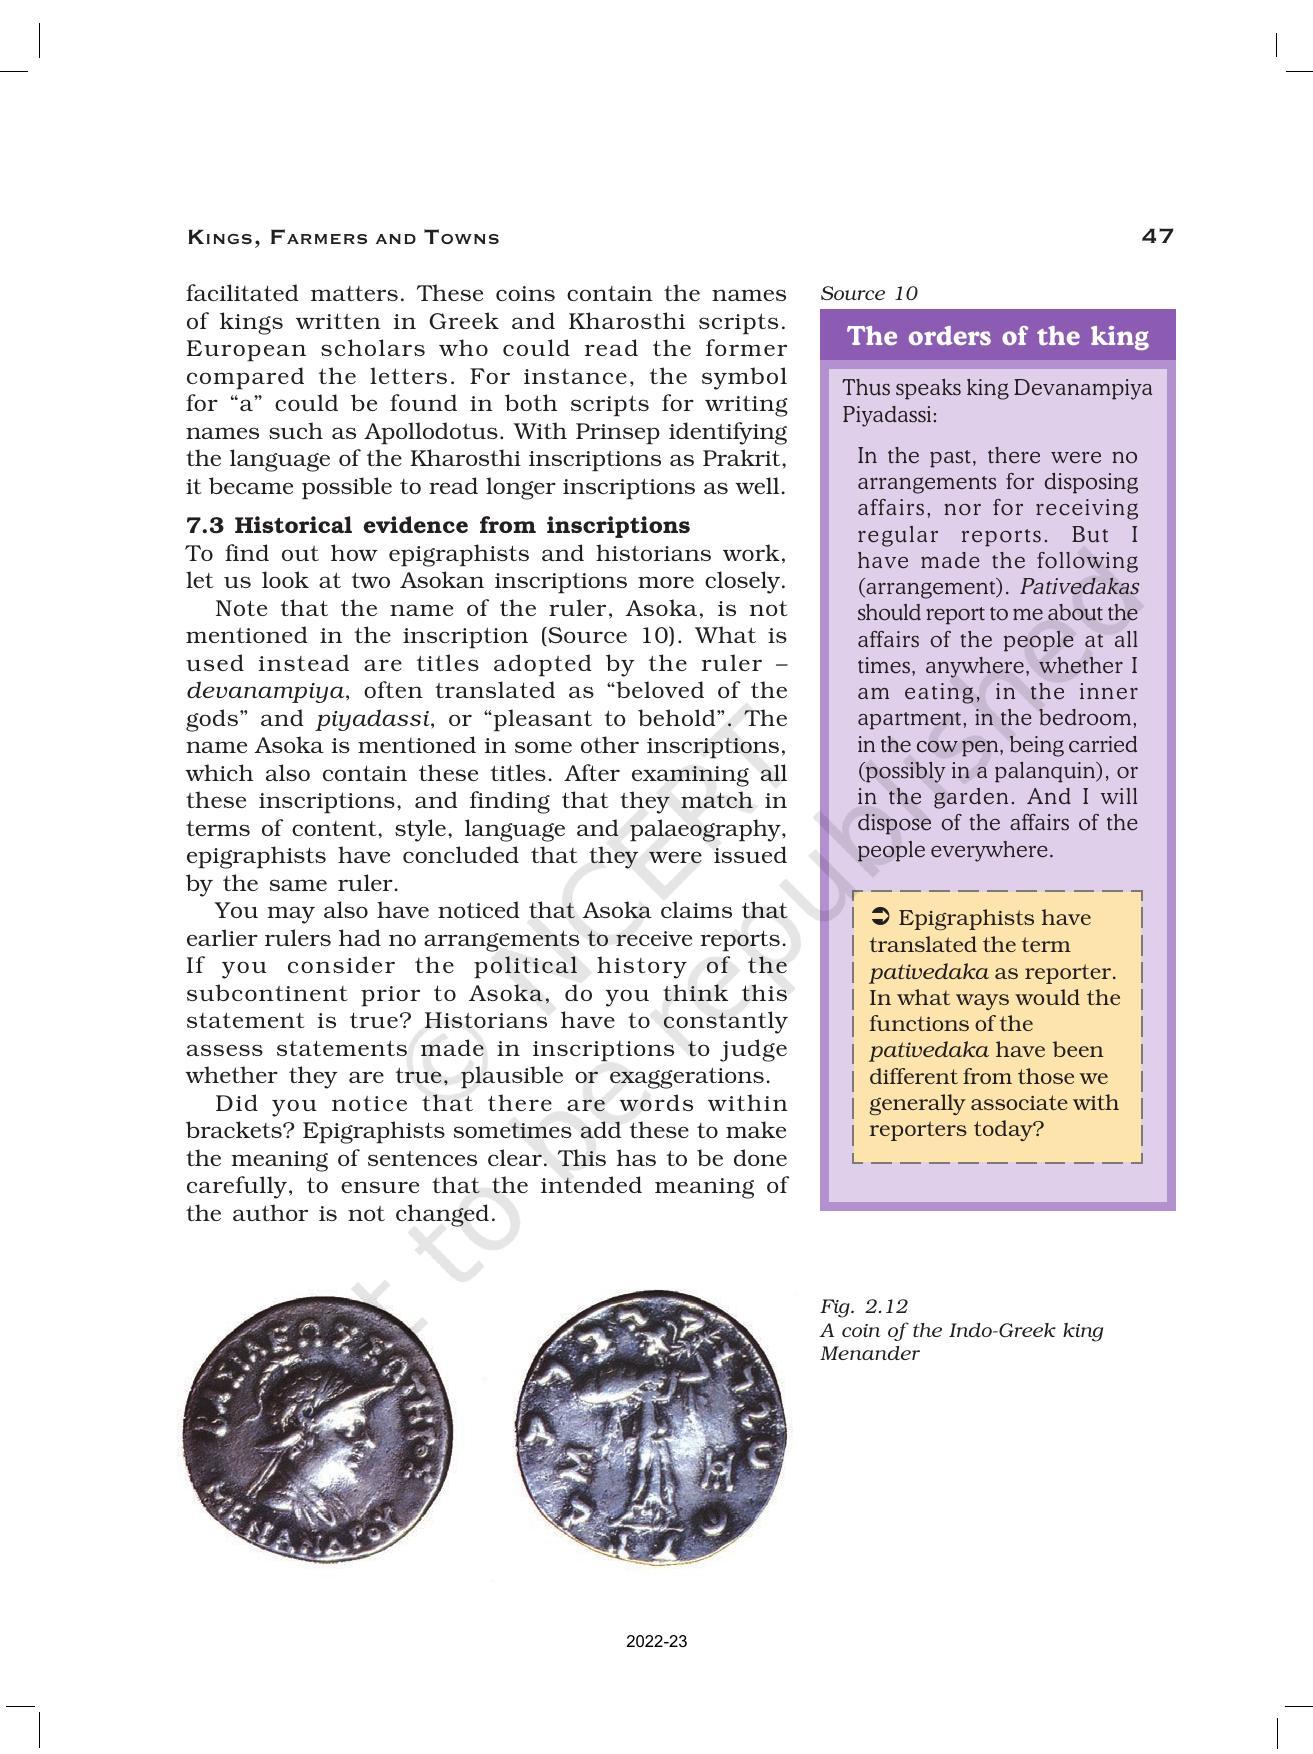 NCERT Book for Class 12 History (Part-1) Chapter 2 Kings, Farmers, and Towns - Page 20